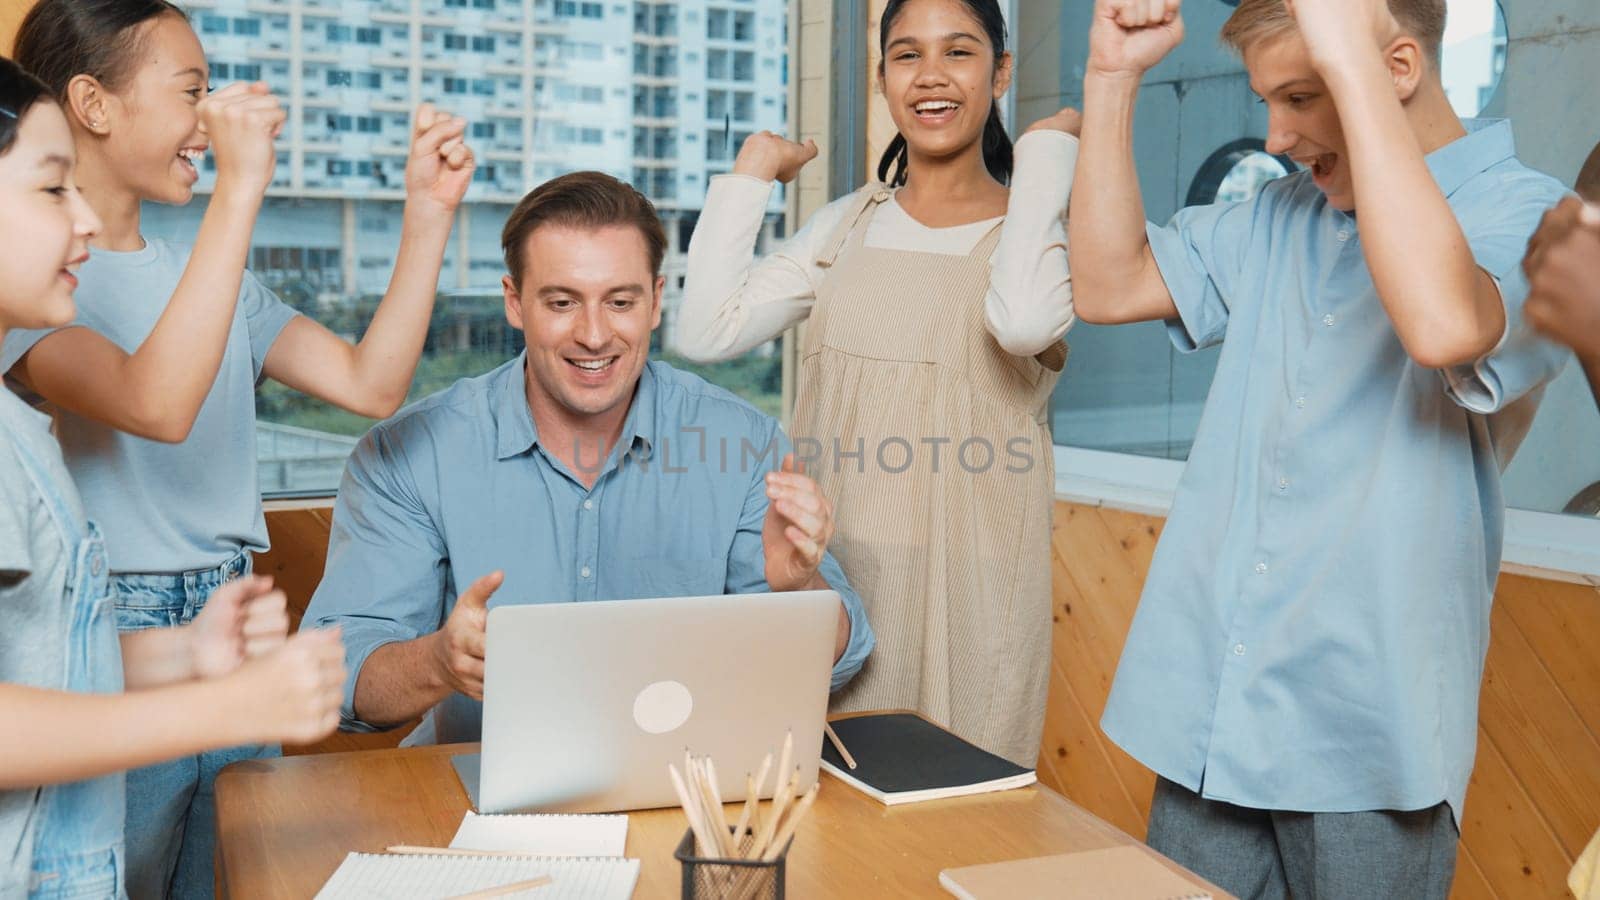 Caucasian teacher and multicultural students clapping hand or putting the hand in the air together to celebrate for successful project with laptop and equipment placed on table in class. Edification.